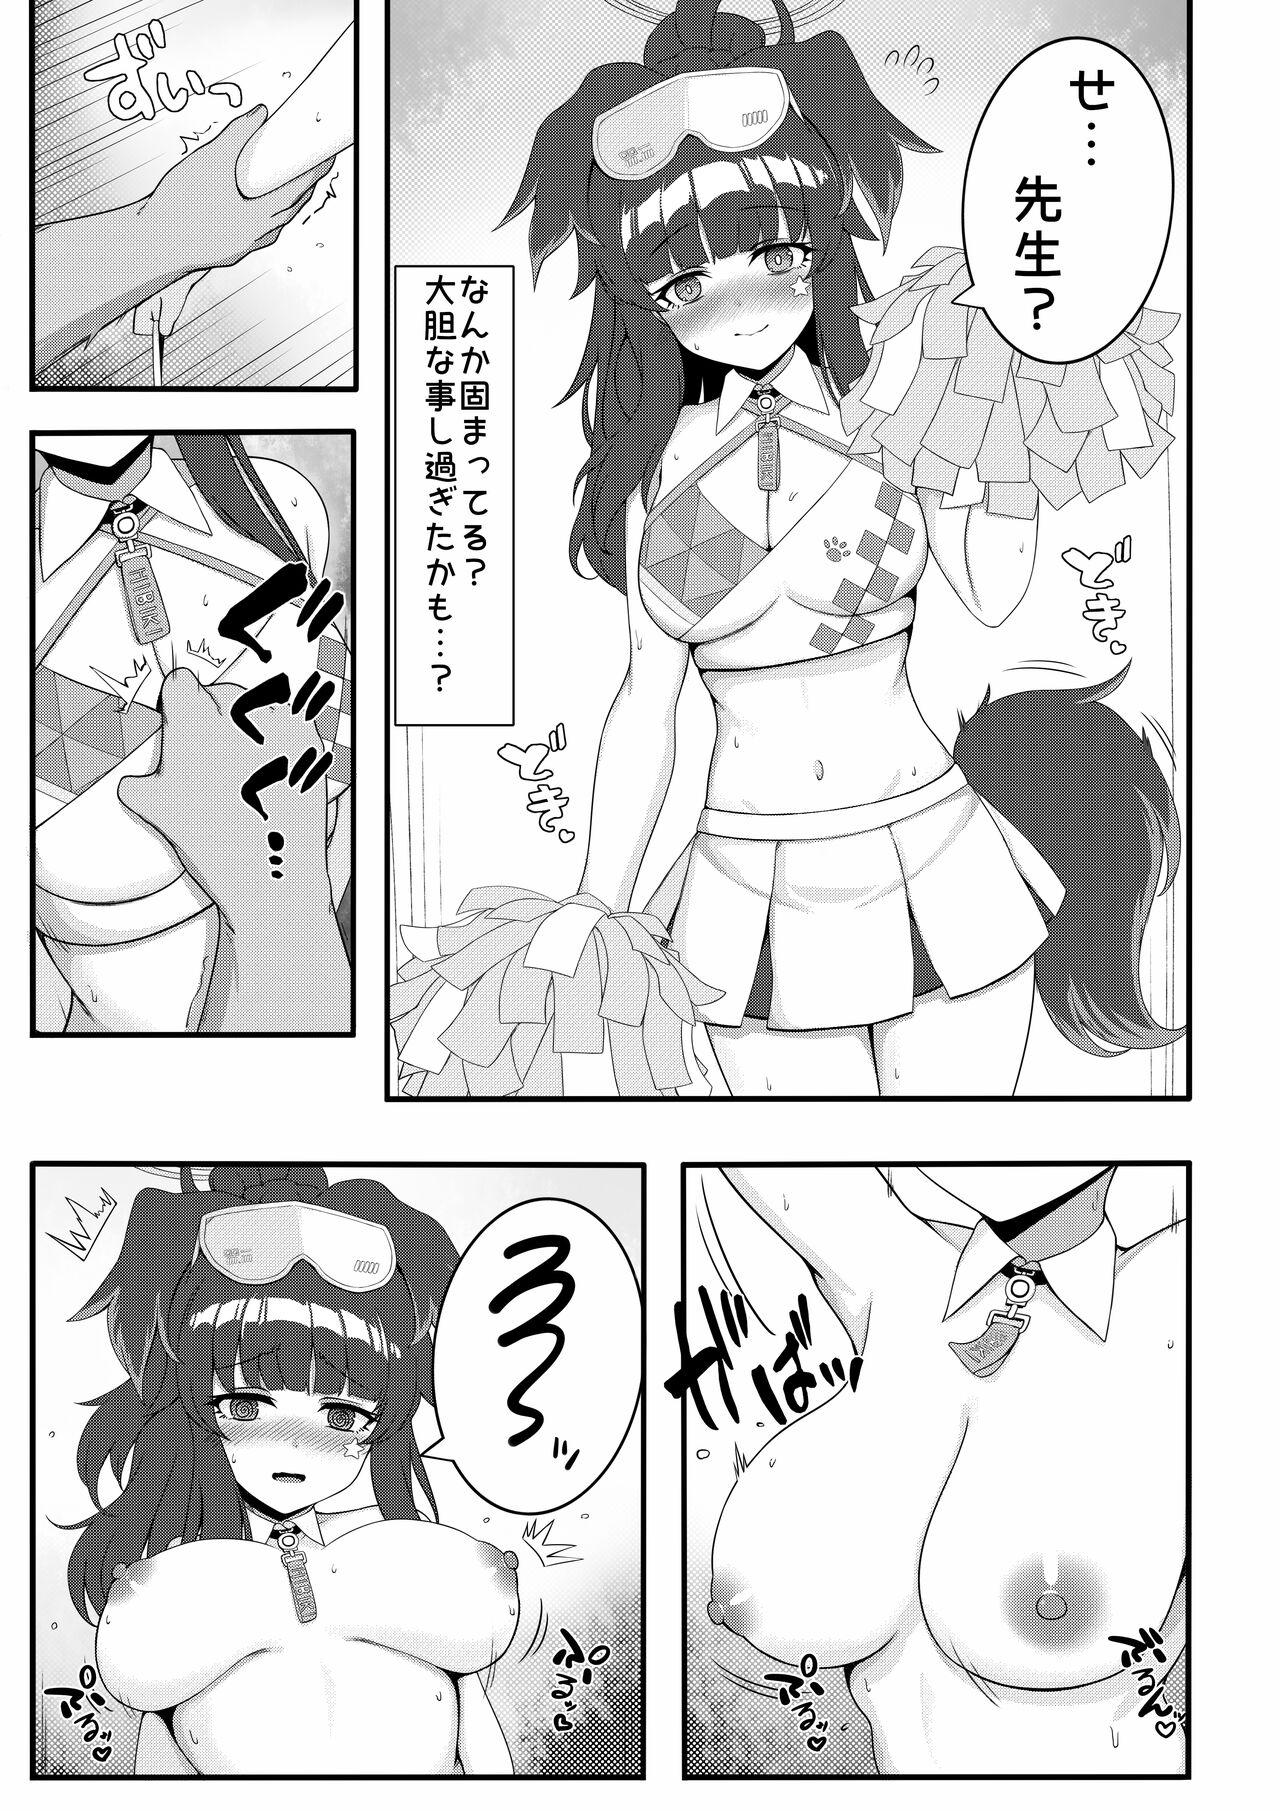 Milf Cougar ヒビキちゃん漫画? - Blue archive Gorda - Page 4